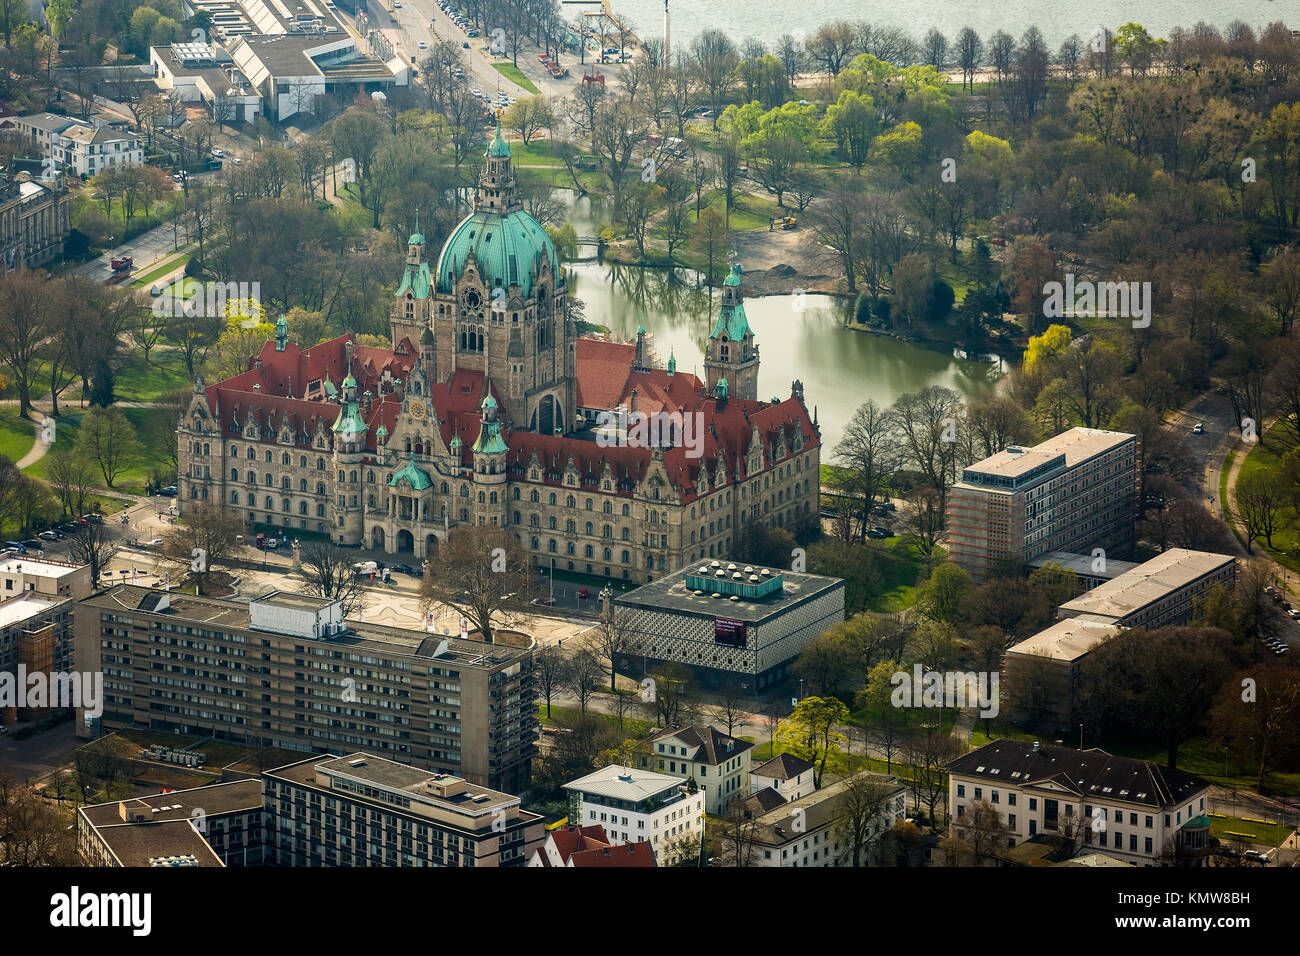 Neues Rathaus, Hanover landmark, Wilhelmine, castle-like magnificent building in eclectic style, City Council, City Hall dome, Hanover, state capital, Stock Photo